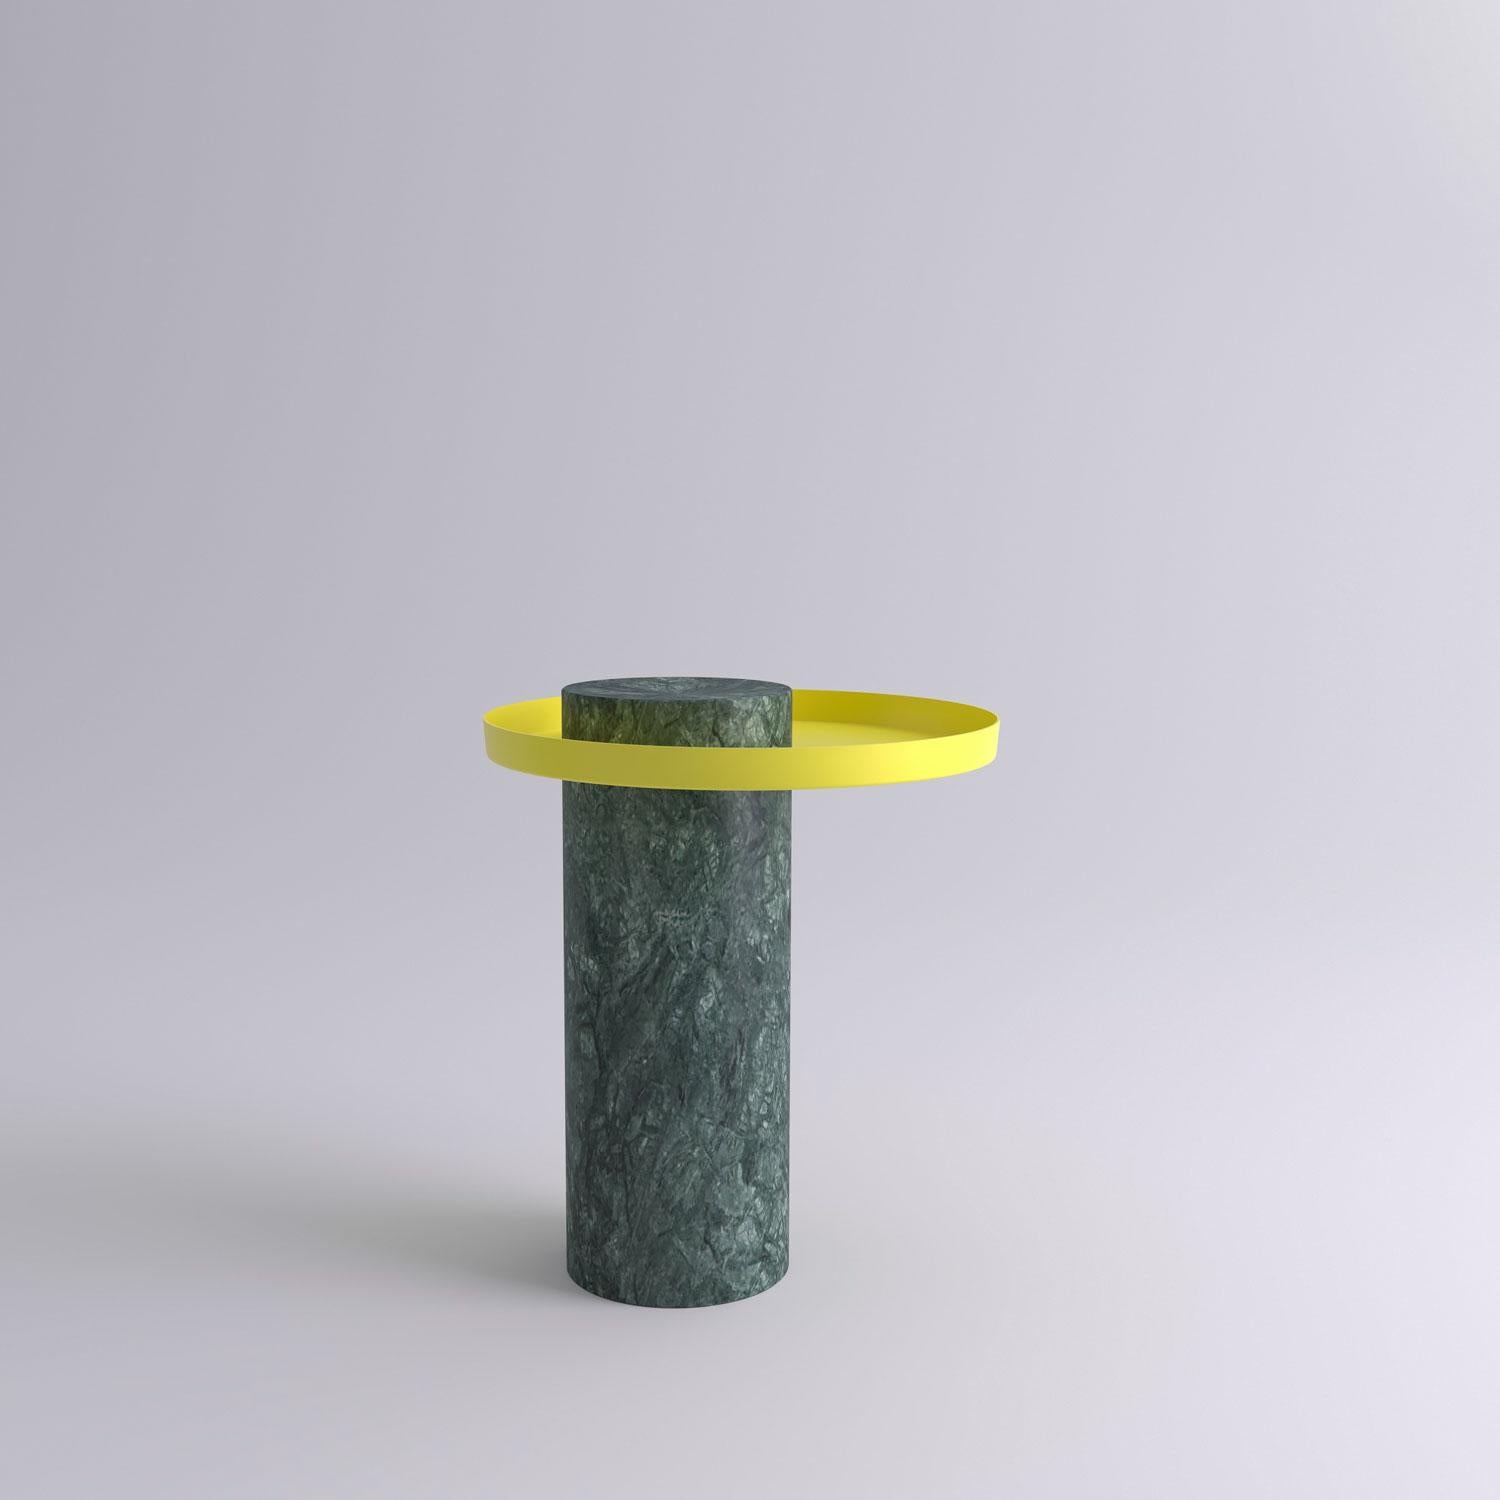 Medium indian green contemporary guéridon, Sebastian Herkner
Dimensions: D 40 x H 46 cm.
Materials: Indian green marble, yellow metal tray.

The salute table exists in 3 sizes, 4 different marble stones for the column and 5 different finishes